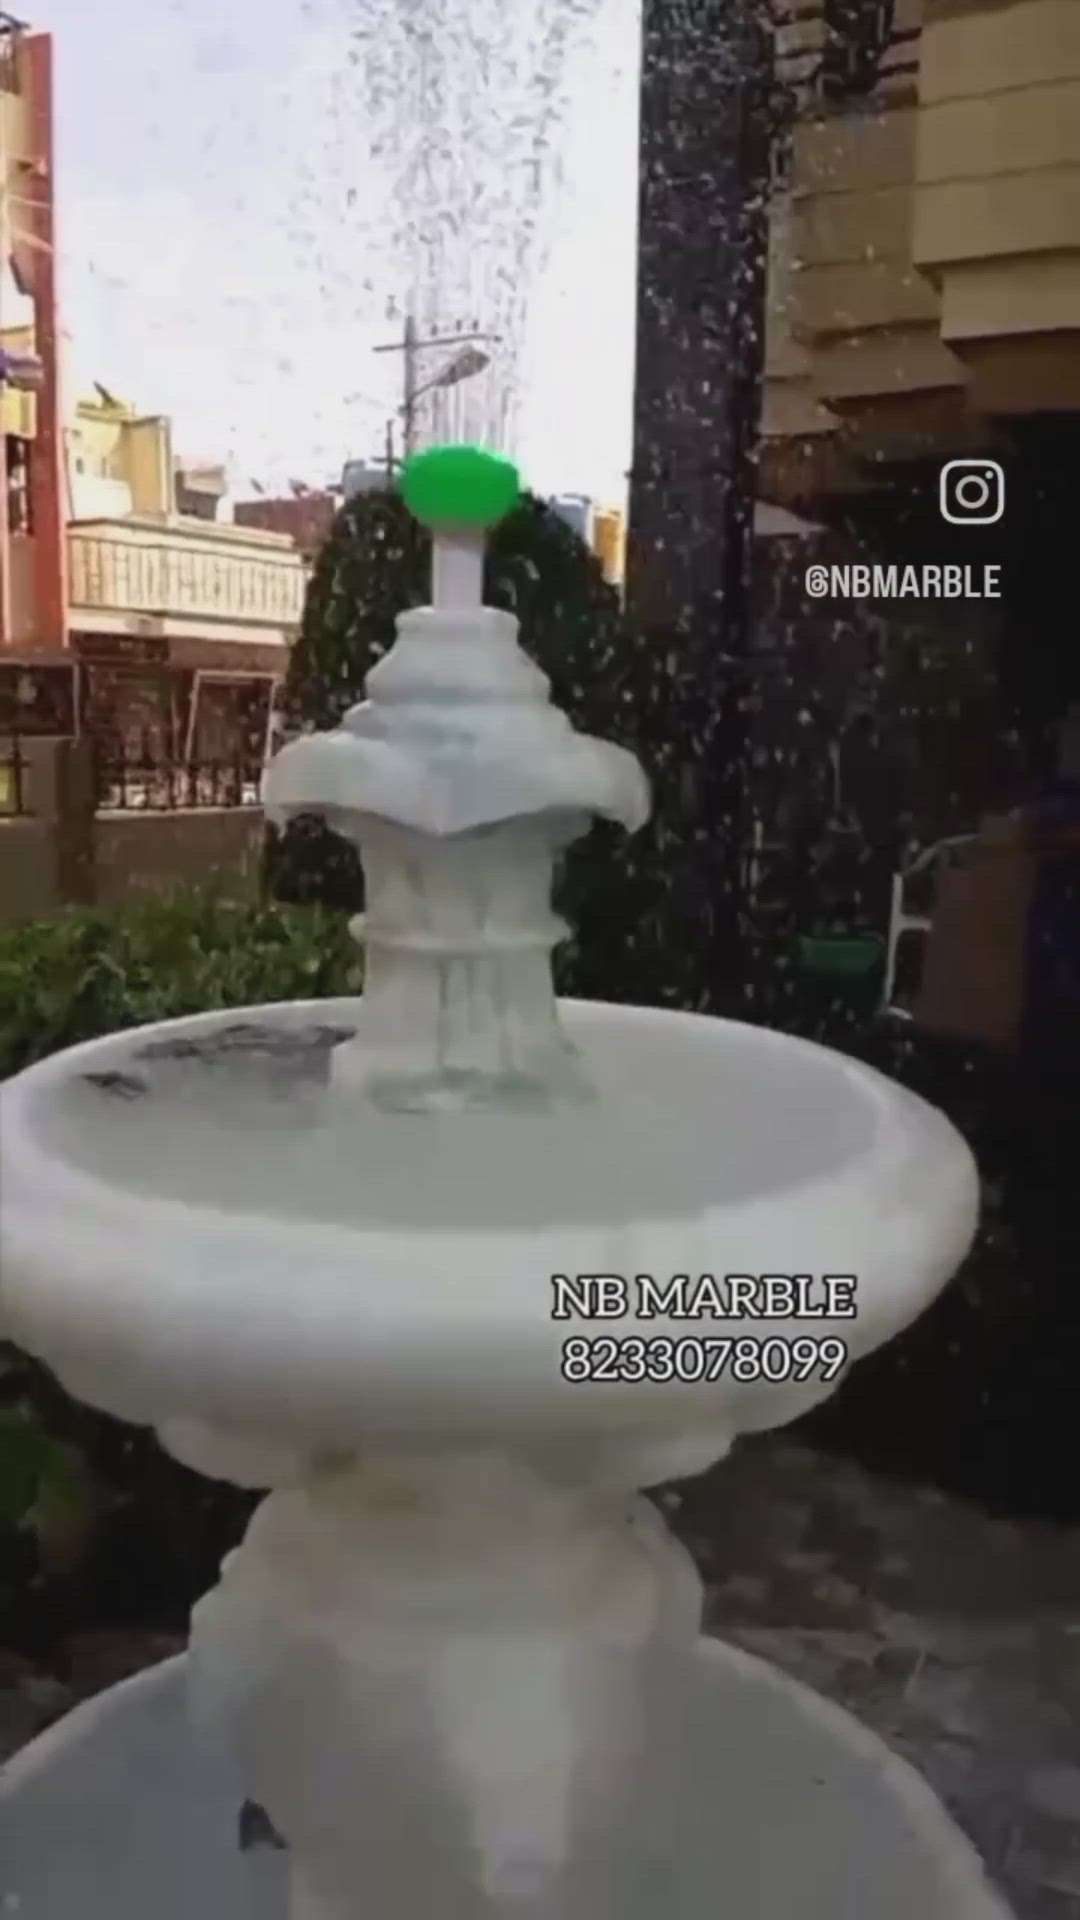 White Marble Fountain with Tank

Decor your garden with beautiful fountain

We are manufacturer of marble and sandstone fountains

We make any design according to your requirement and size

Follow me on instagram
https://instagram.com/nbmarble?utm_source=qr&igshid=MzNlNGNkZWQ4Mg%3D%3D

More Information Contact Me
8233078099

#fountain #nbmarble #marblefountain #gardendecor #gardeninspiration #gardensofinstagram